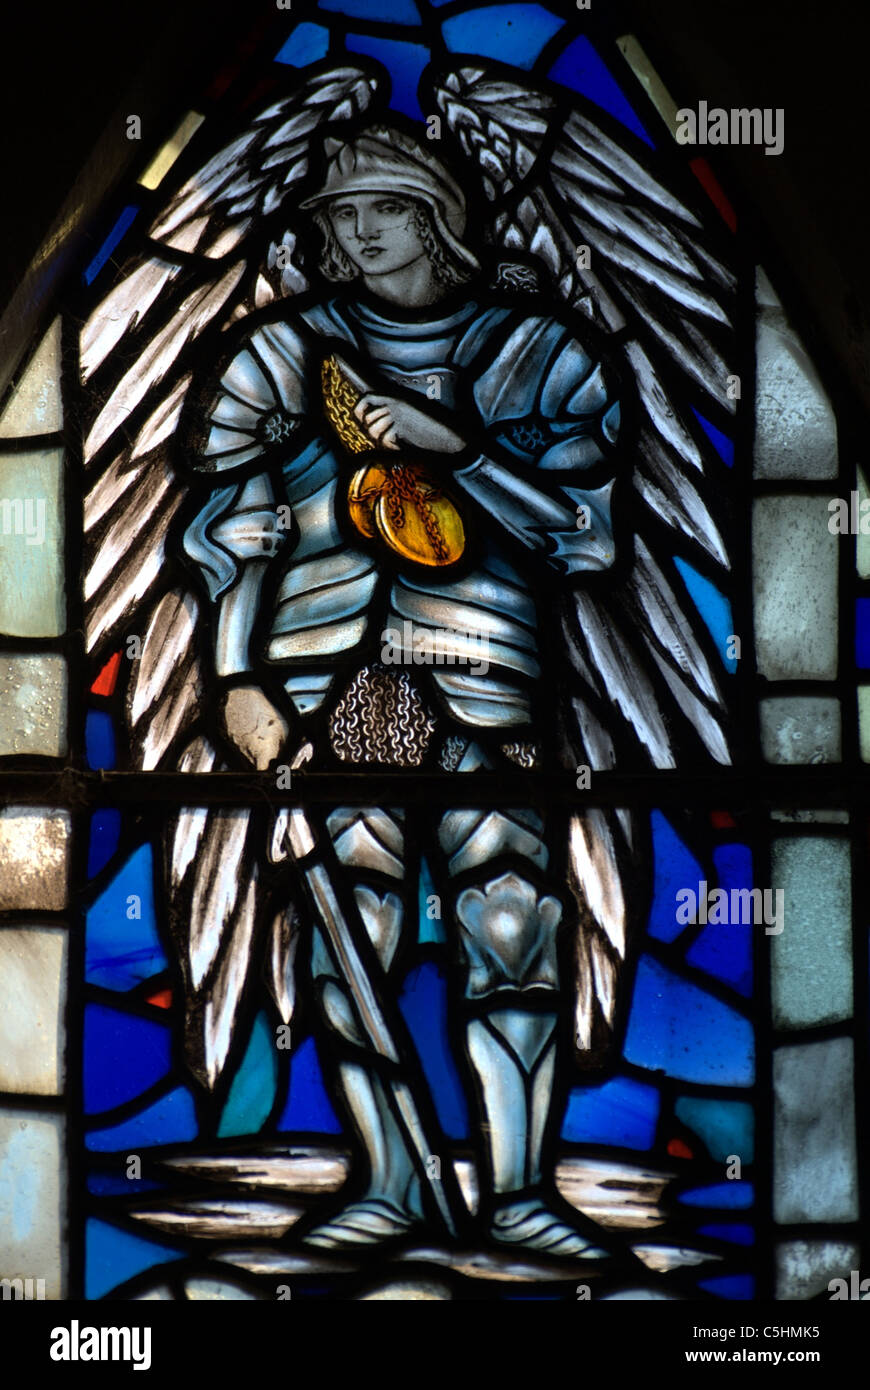 St.Michael the Archangel dressed in traditional armour with sword, and carrying Scales to weigh souls. Stock Photo